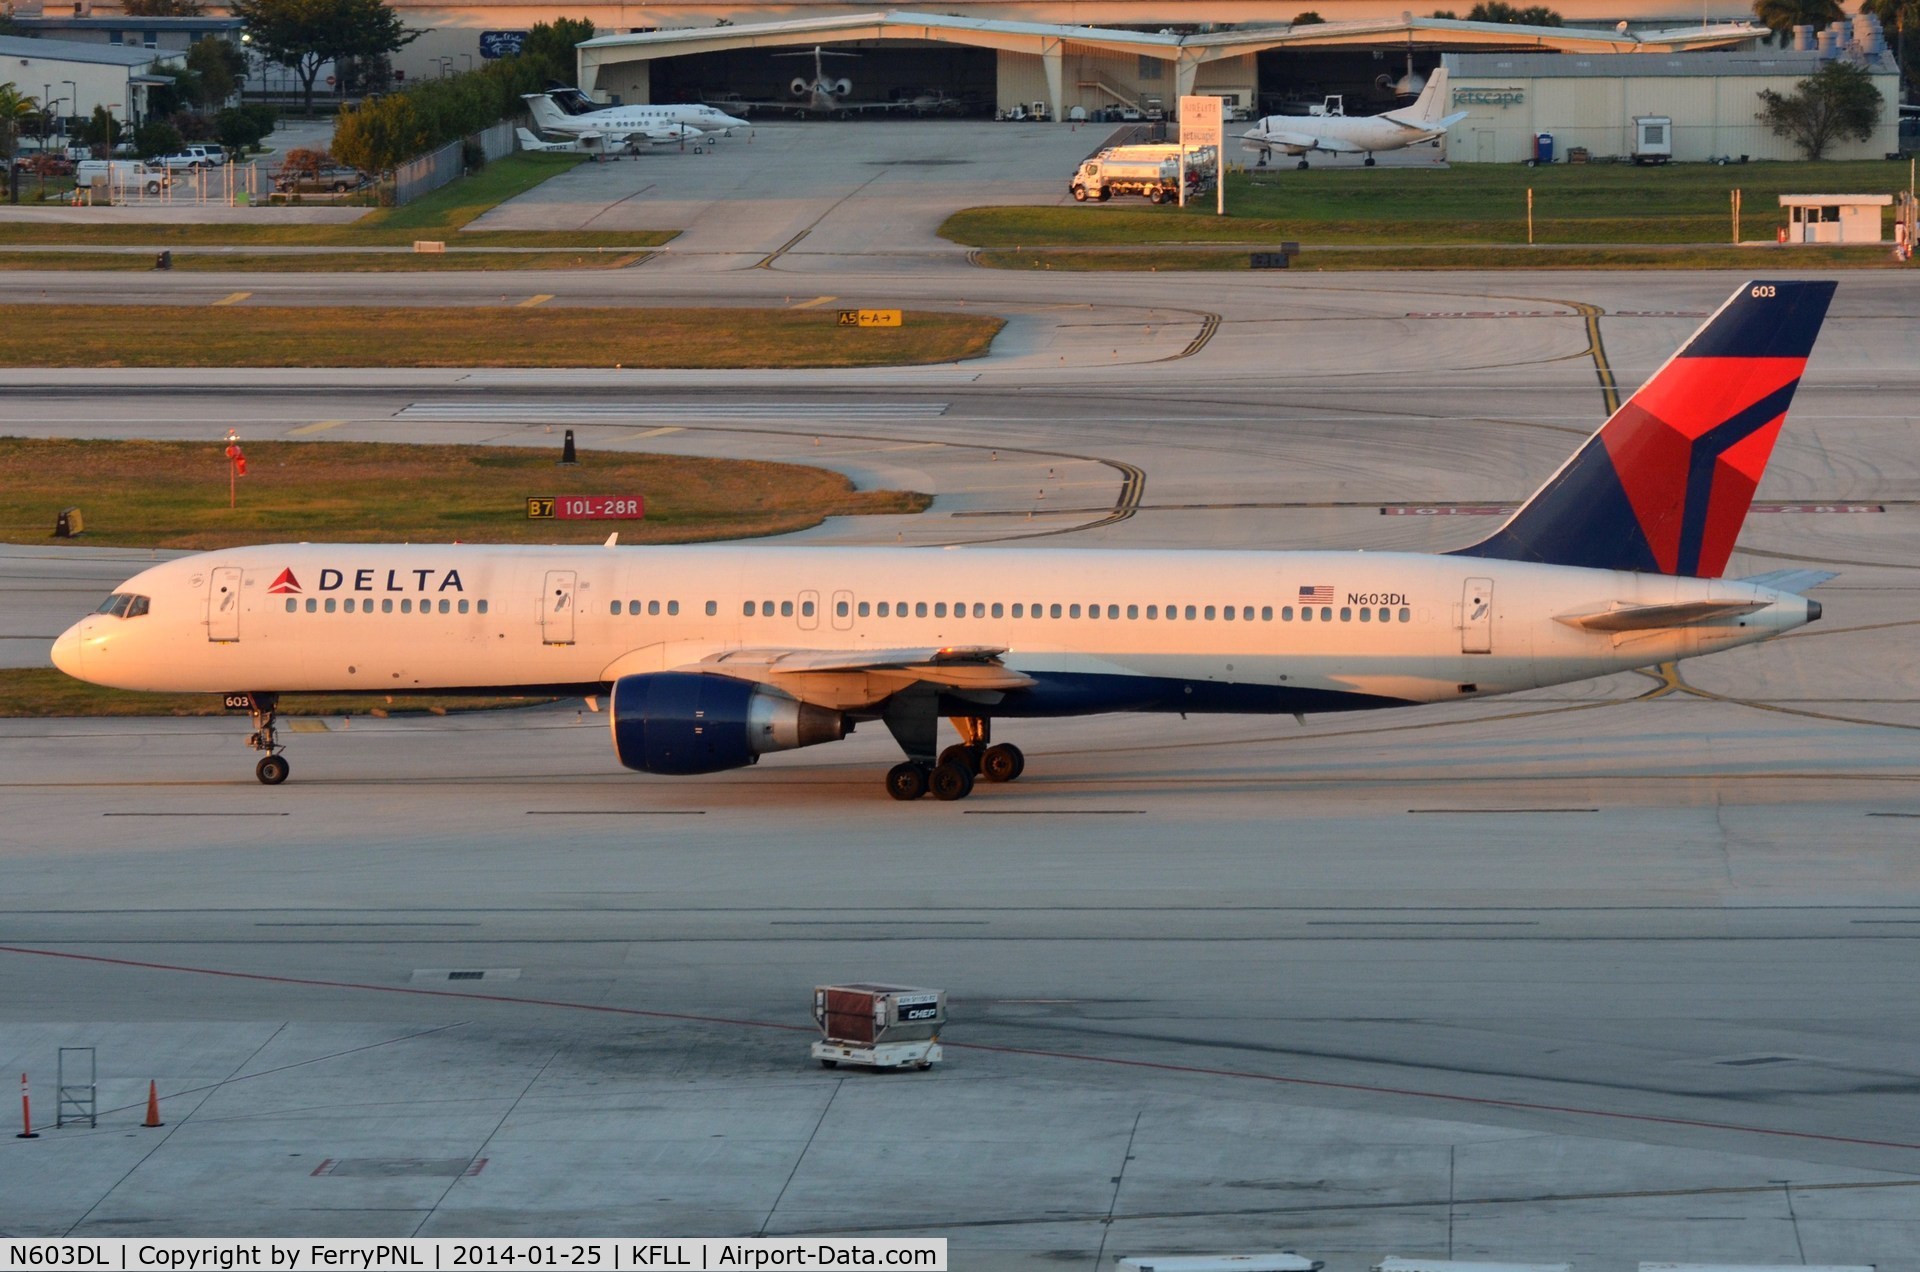 N603DL, 1984 Boeing 757-232 C/N 22810, Delta B752 pushed-back from its gate.